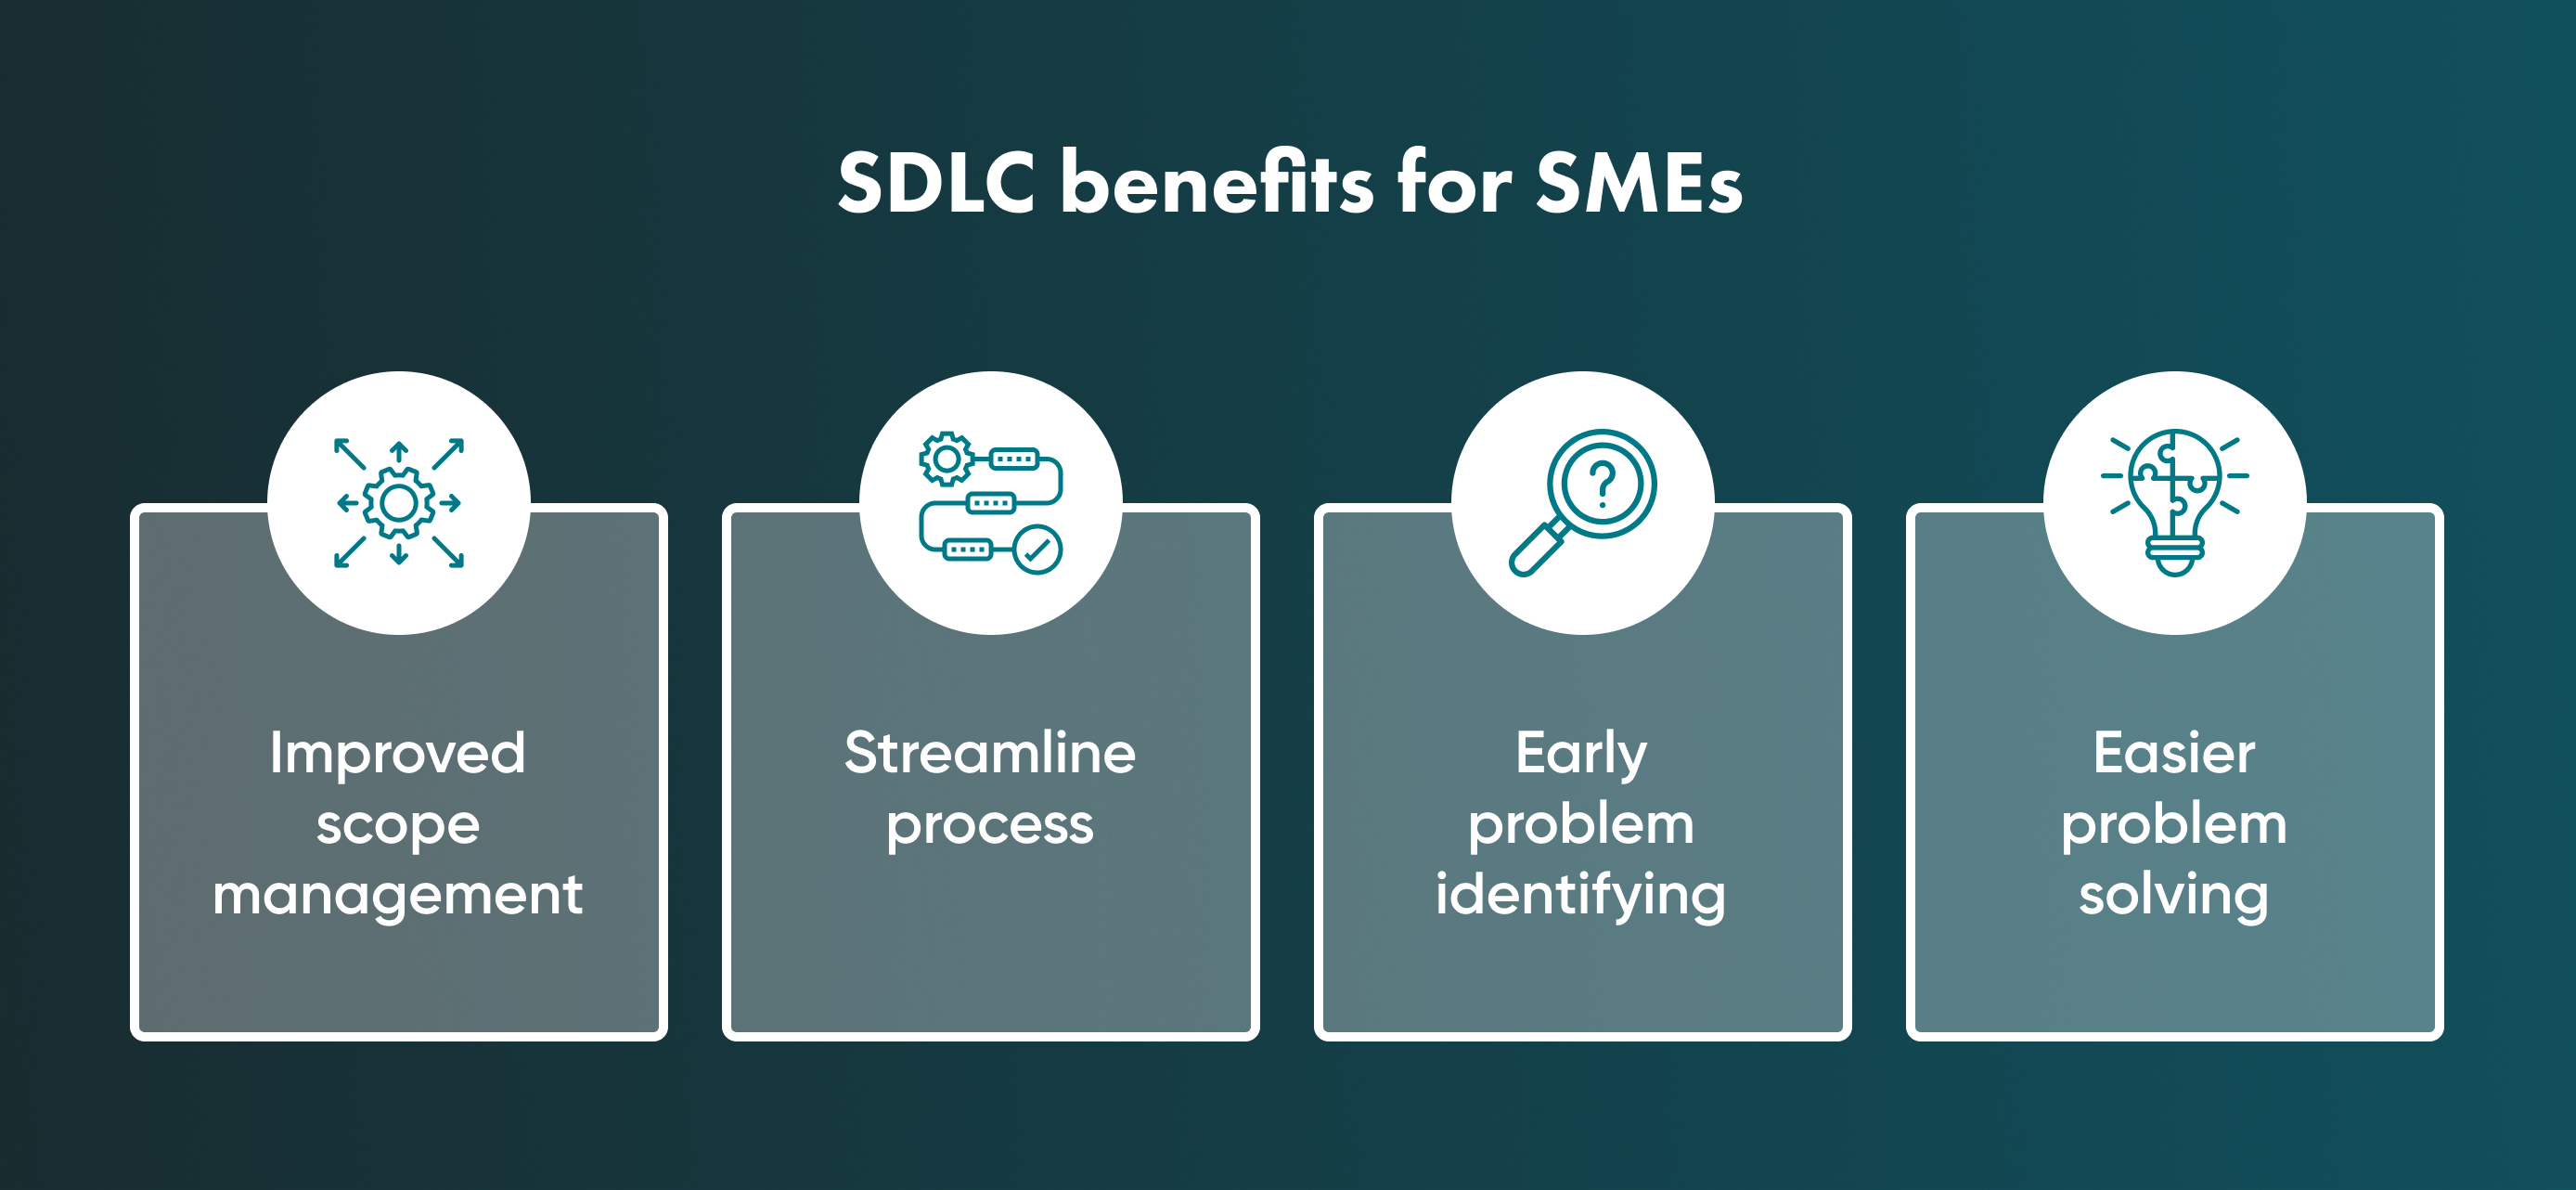 SDLC gives small and medium businesses benefits like early problem identification and more straightforward problem-solving. All these pros make businesses more competitive.